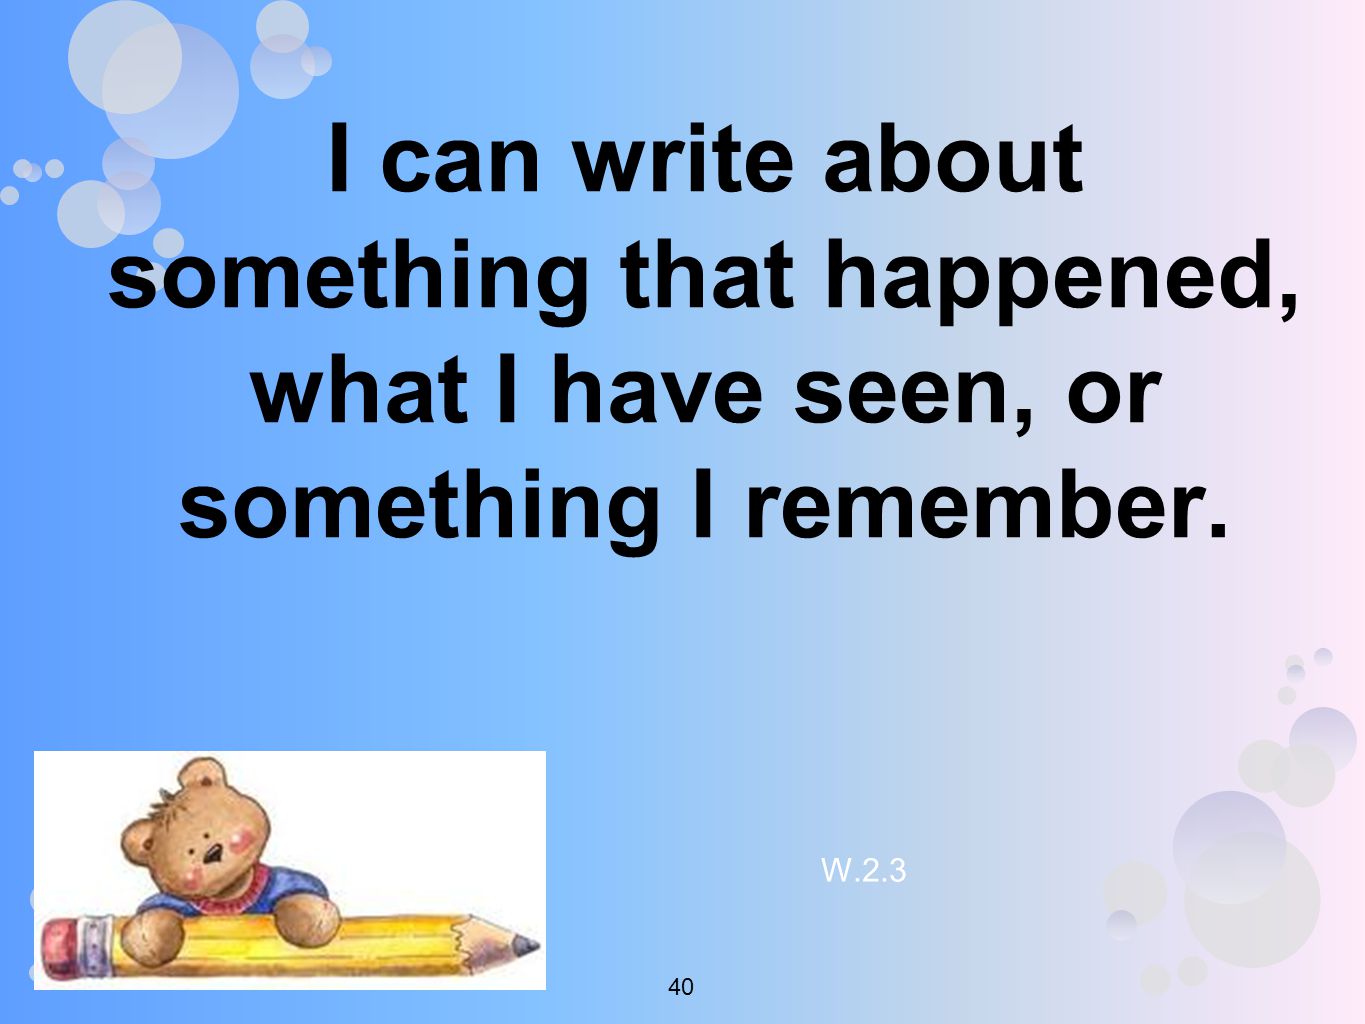 I can write about something that happened, what I have seen, or something I remember. W